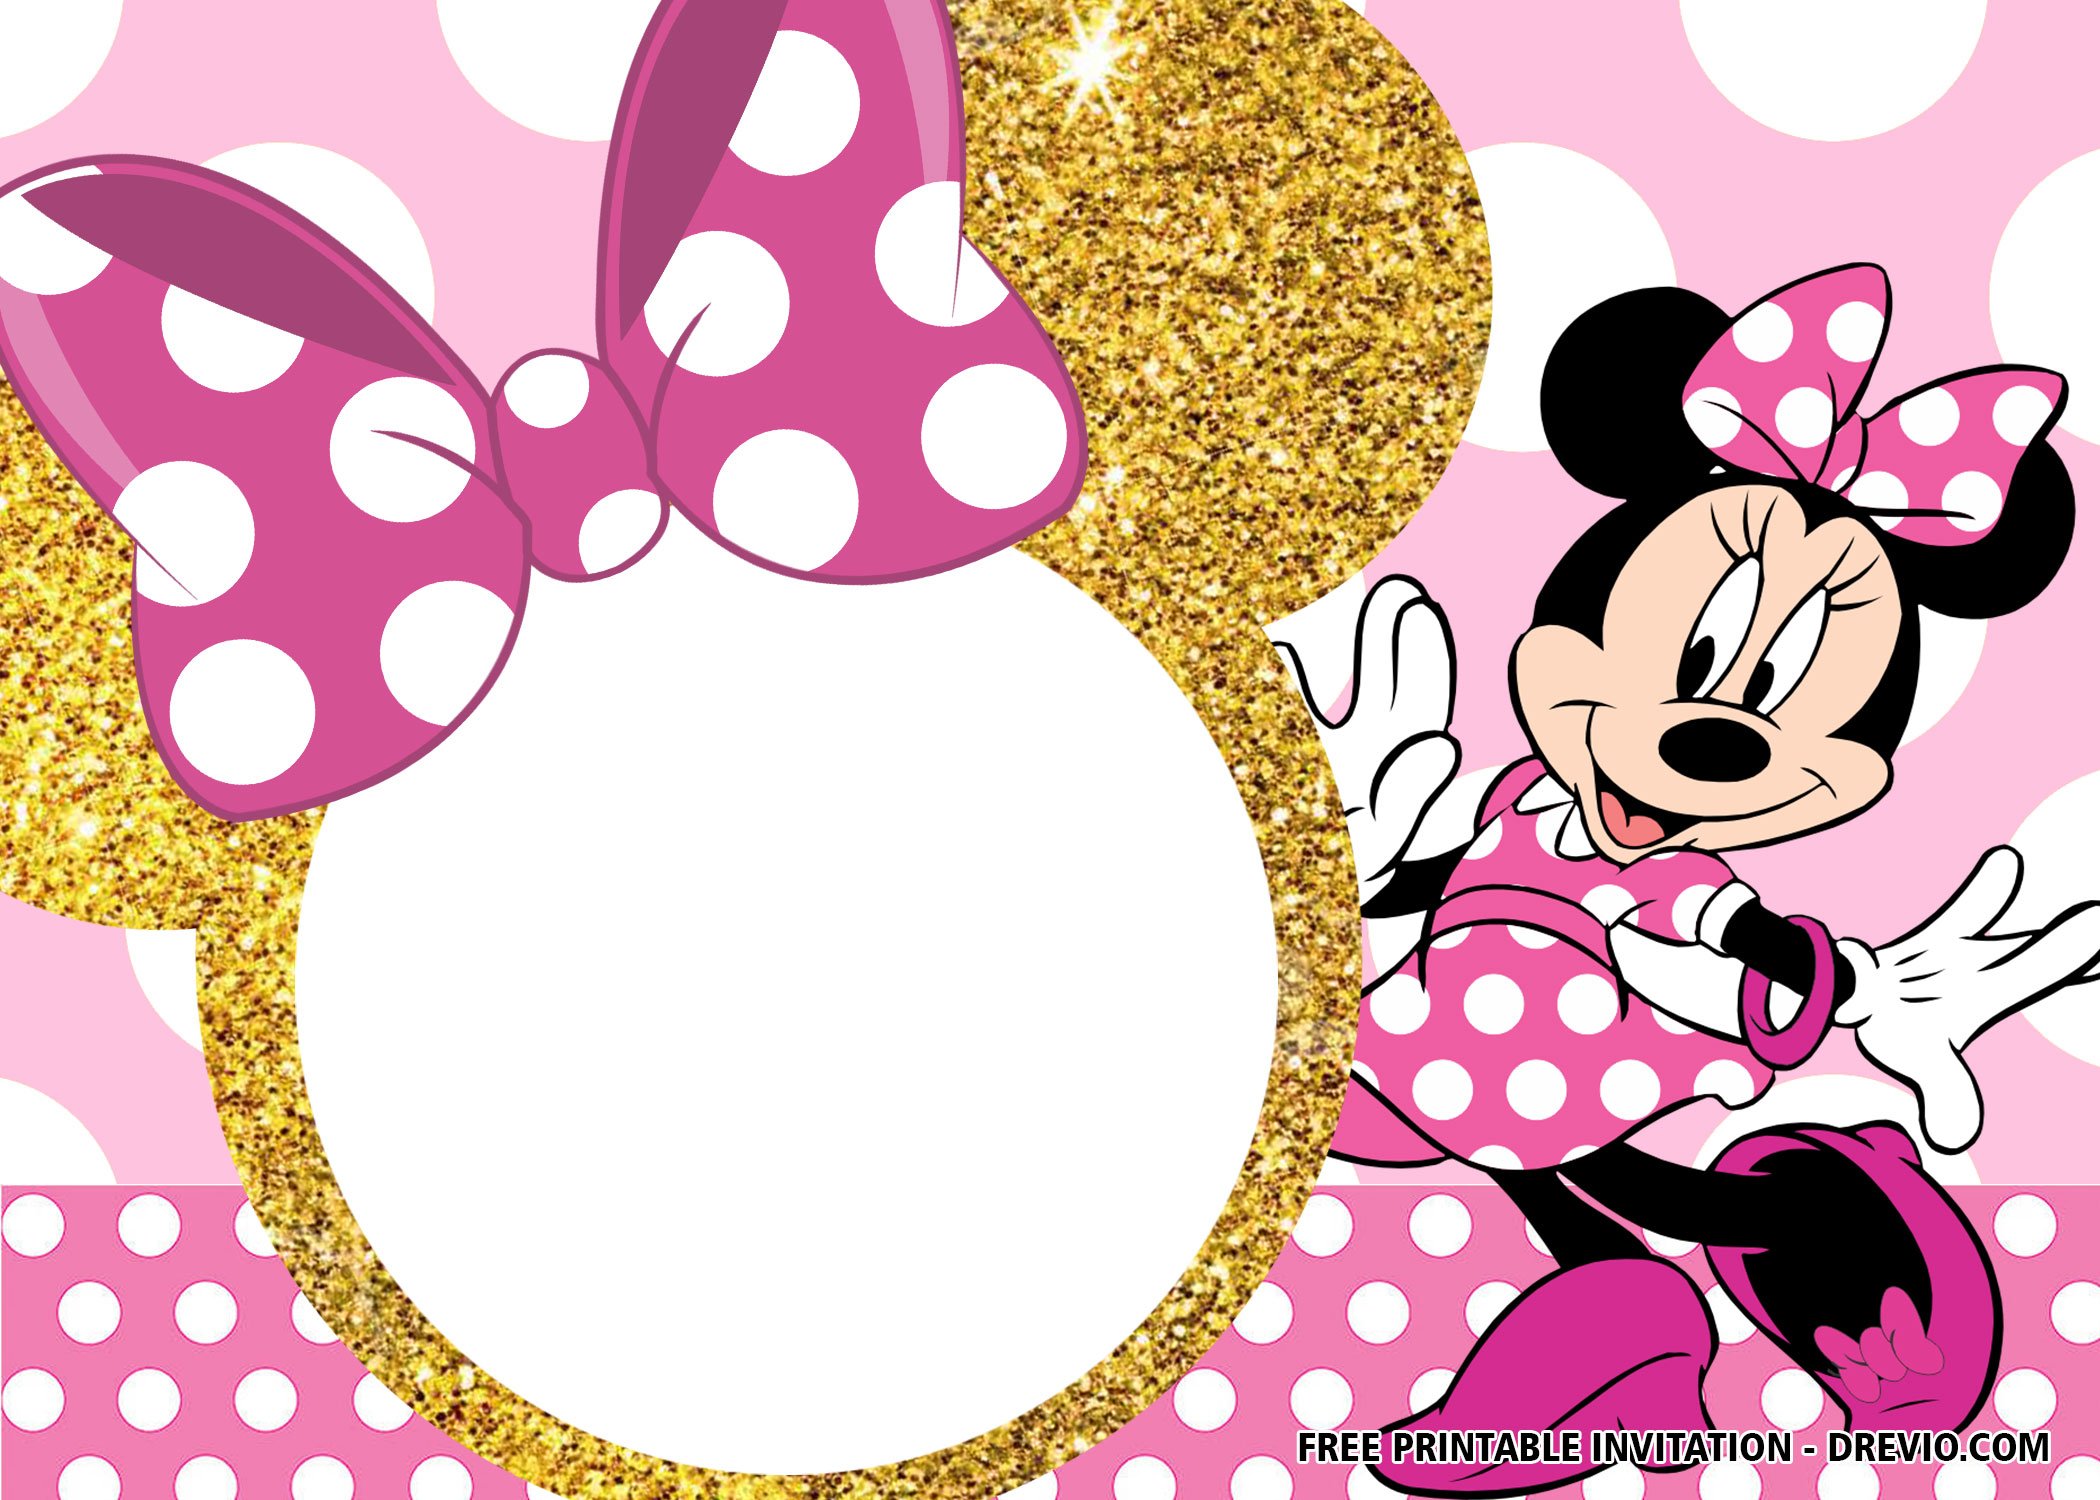 FREE Pink And Gold Minnie Mouse Invitation Templates FREE Printable Baby Shower Invitations